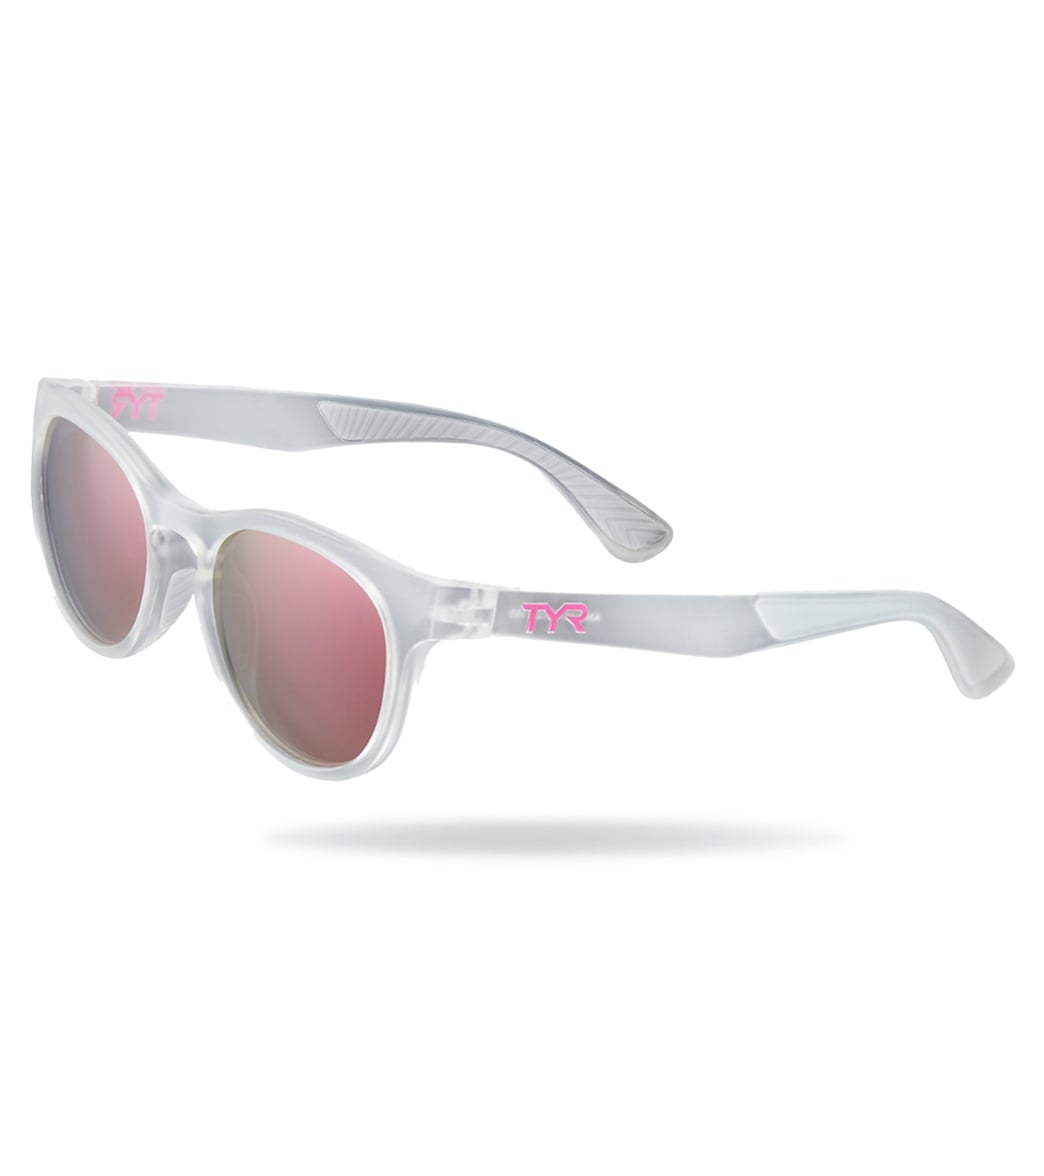 TYR Women's Ancita Lifestyle Ii Sunglasses - Pink/Clear - Swimoutlet.com